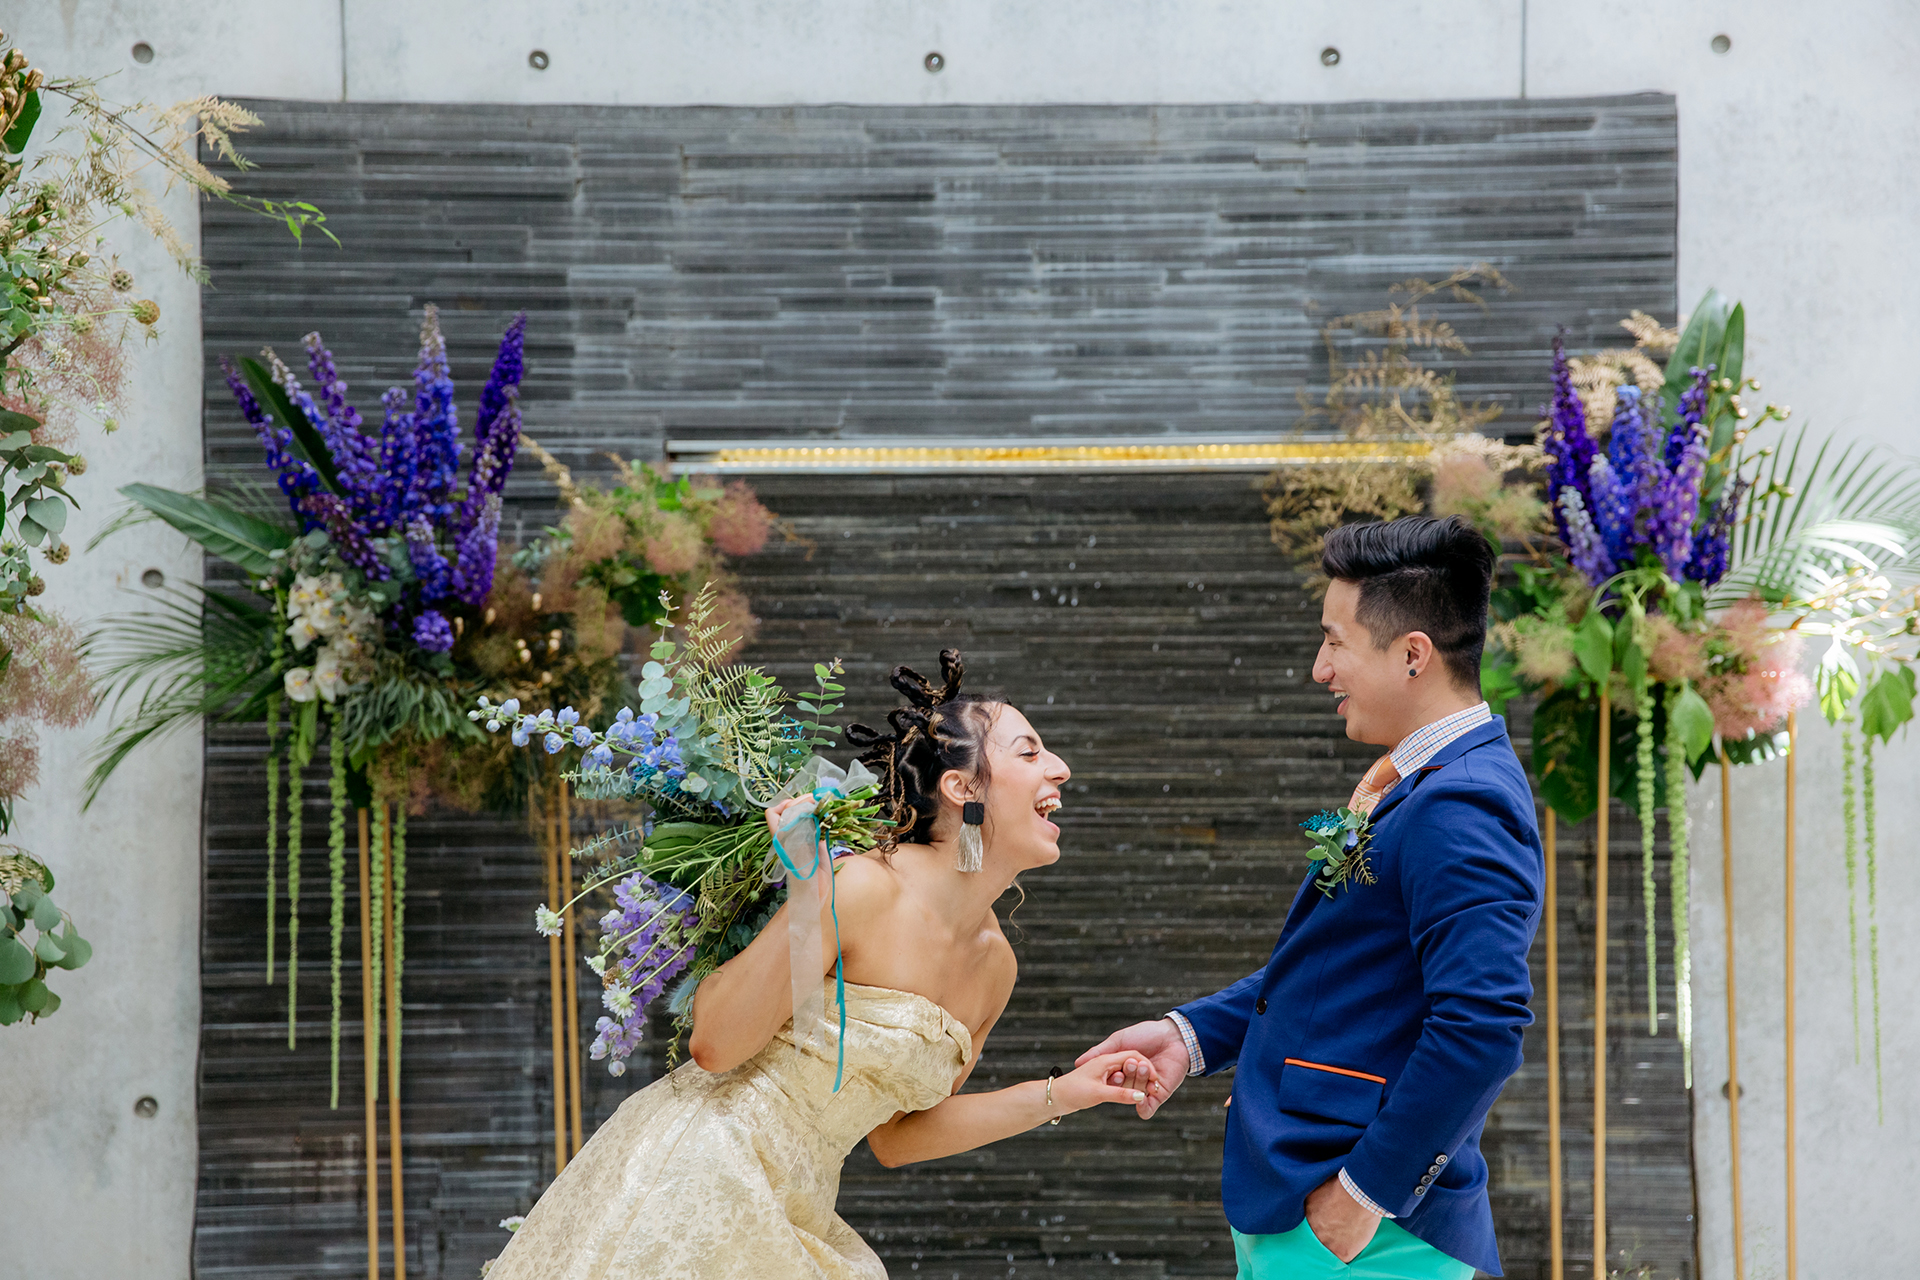 This is a photo of a Bride an Groom during their wedding ceremony at Cocoon House. They are looking at each other and laughing. The bride is dressed in a gold dress and she is holding a bouquet of flowers. The Groom is wearing a bright blue blazer, green pants and his holding her hand. They are laughing and joyful.